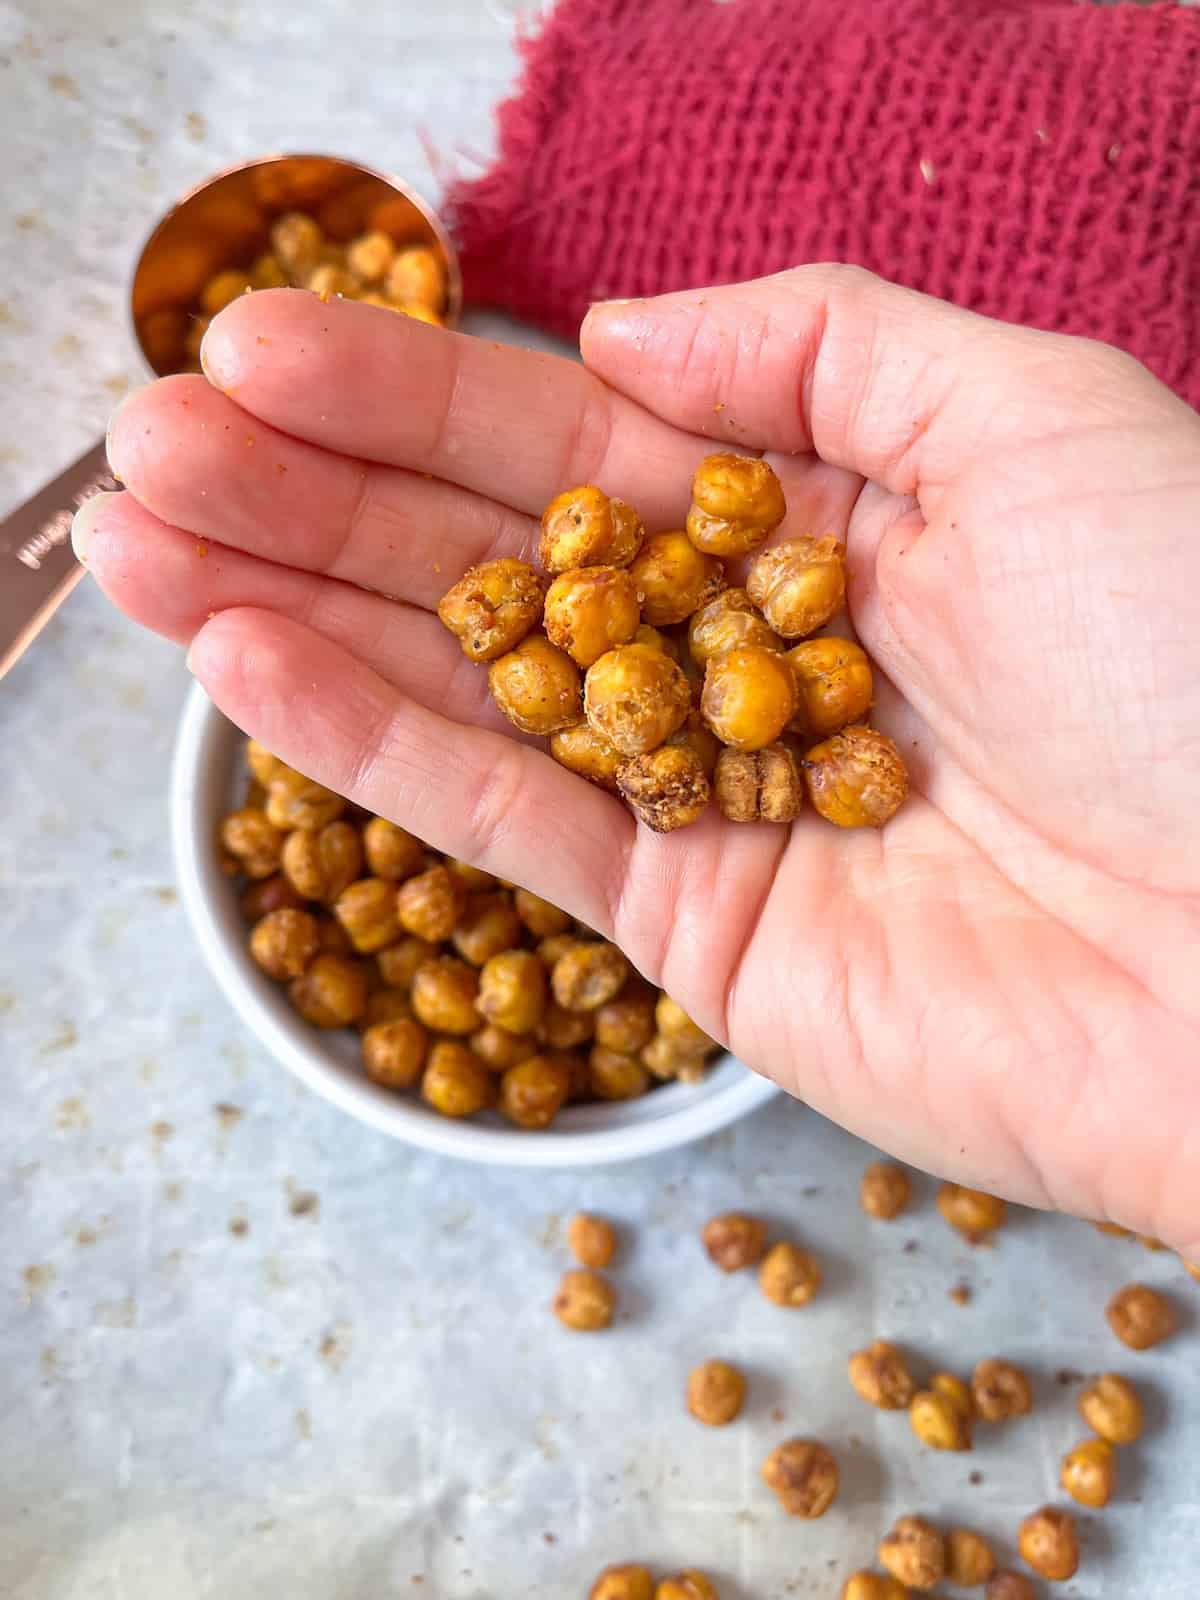 roasted chickpeas being held in a hand with a red towel in the background